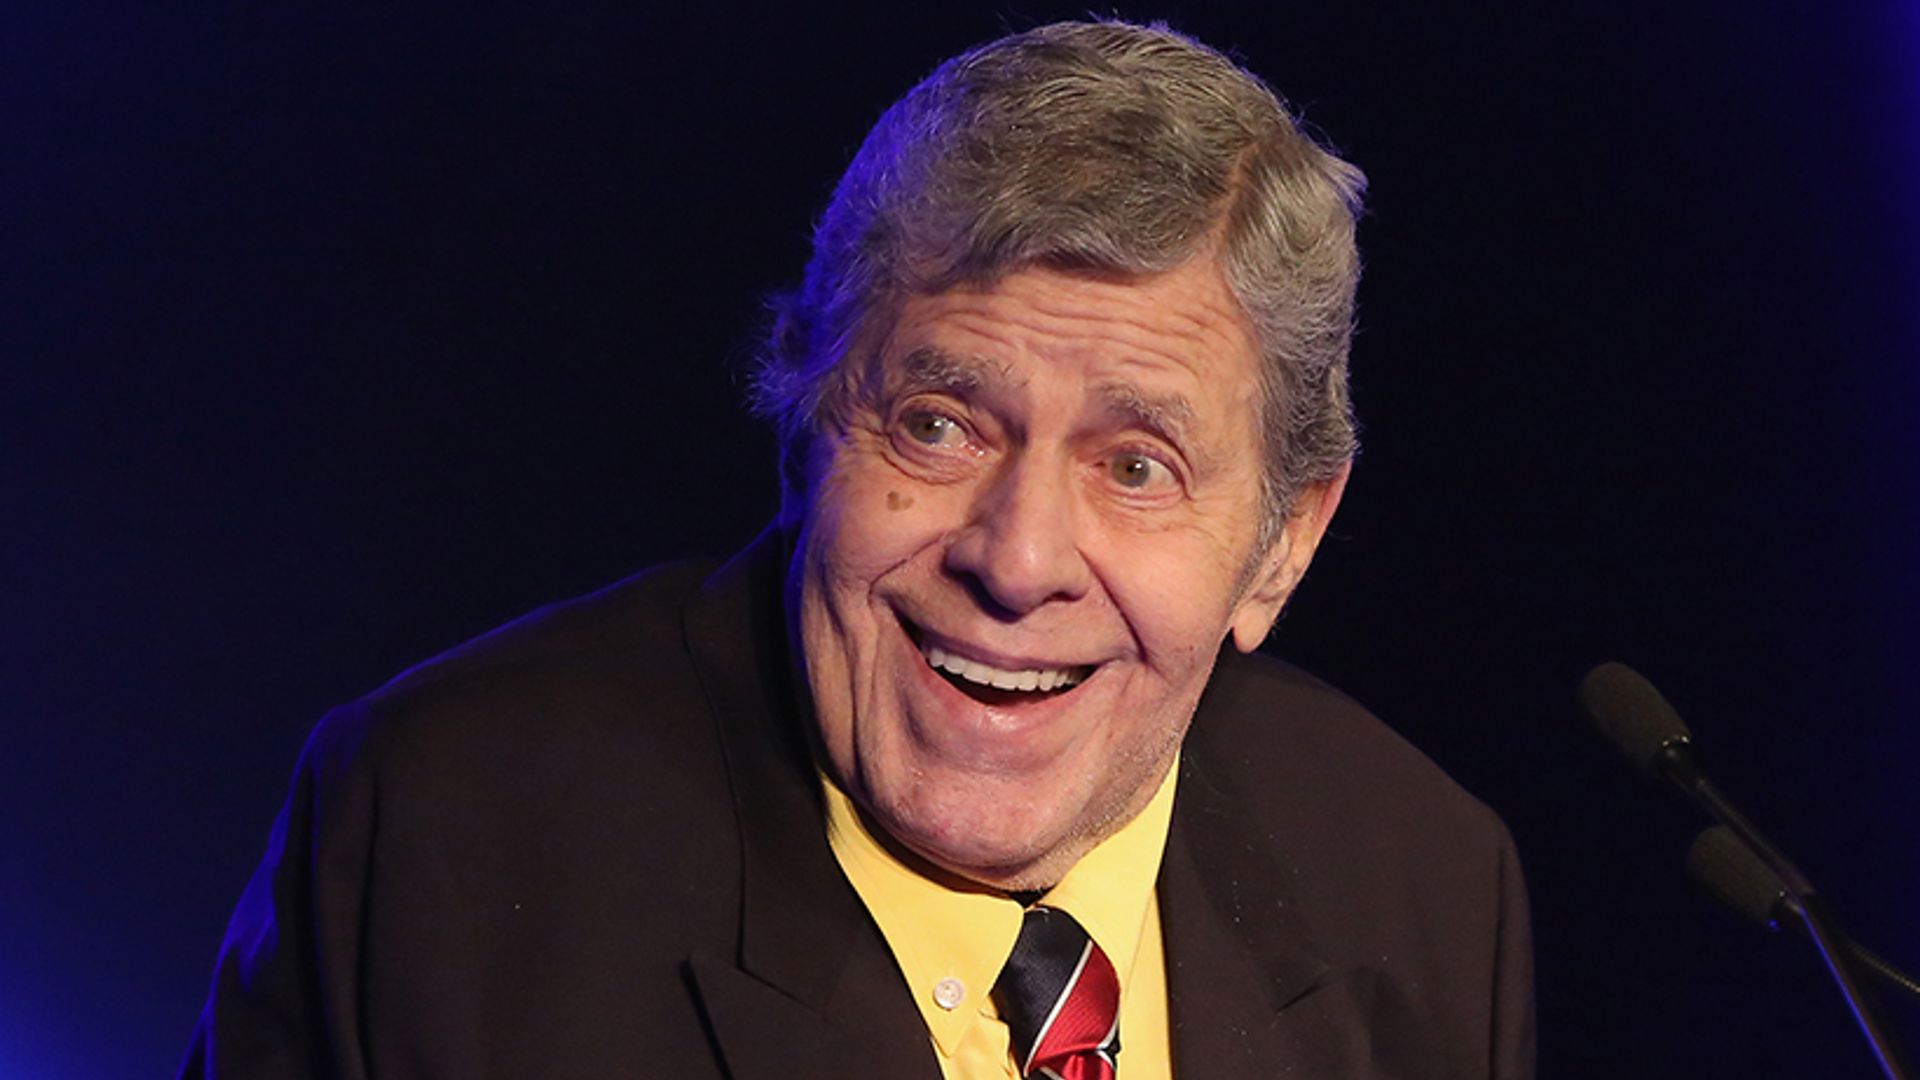 Jerry Lewis dead at 91: Hollywood pays tribute to US comedian